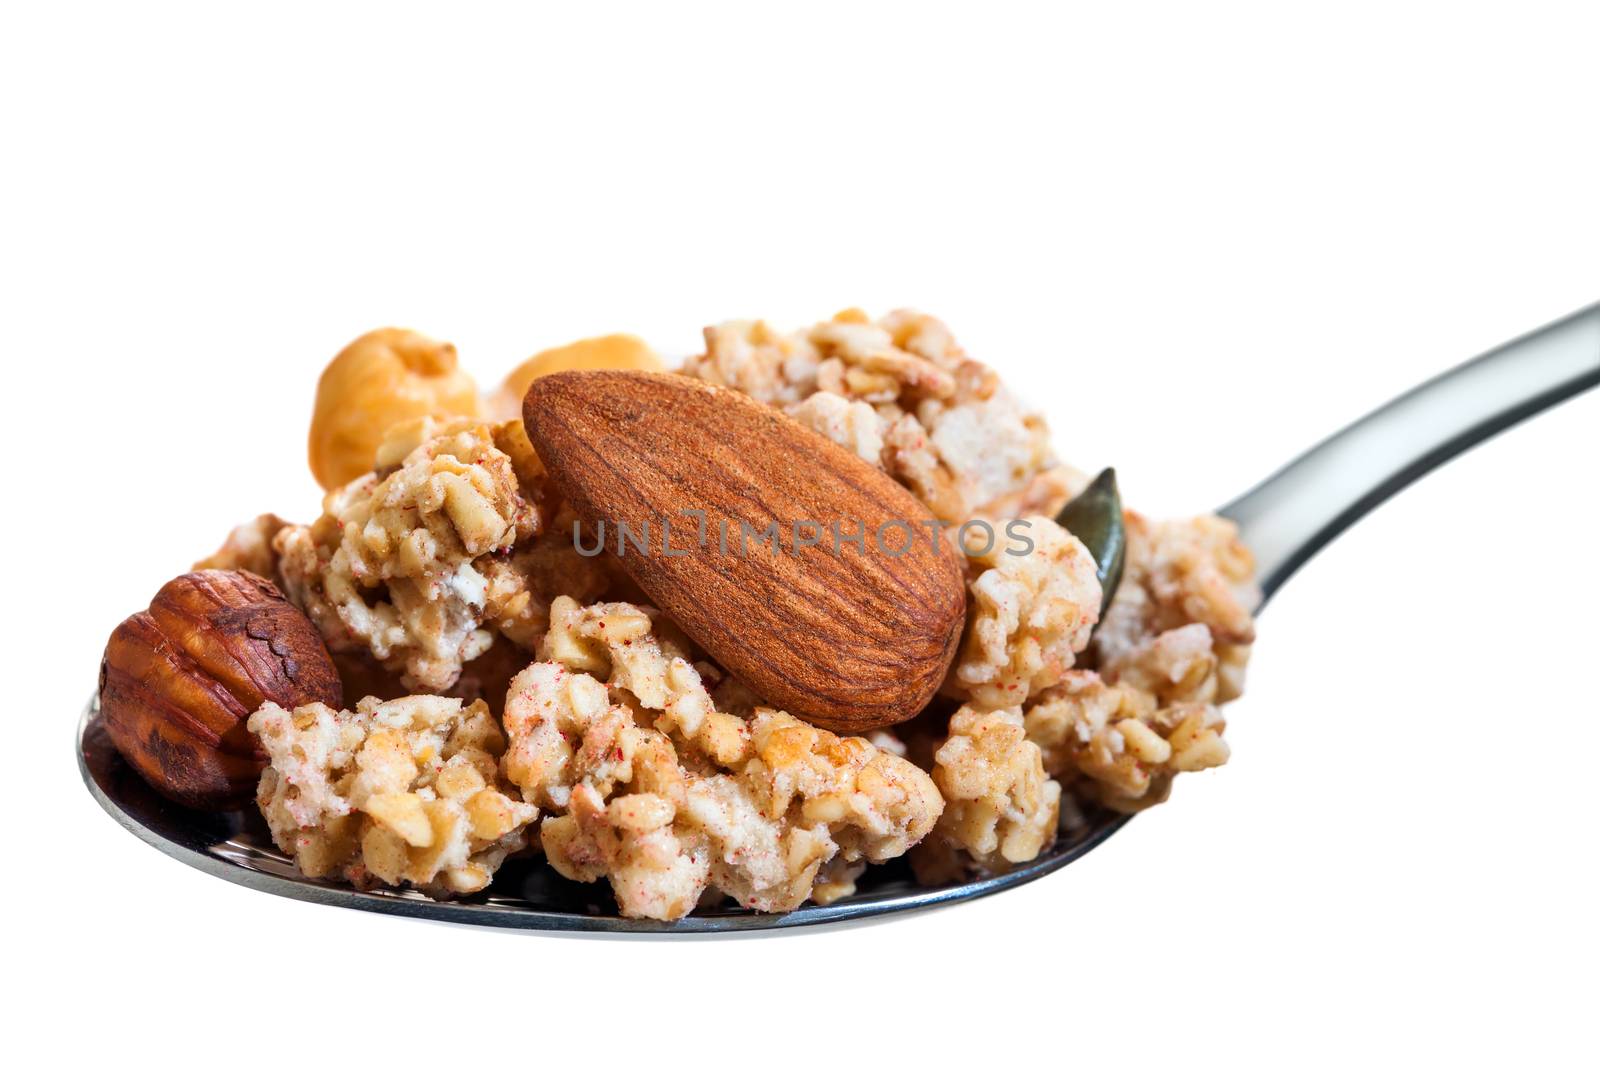 Macro close up of Spoon with mouthful of crunchy muesli and nuts. Isolated on white background.